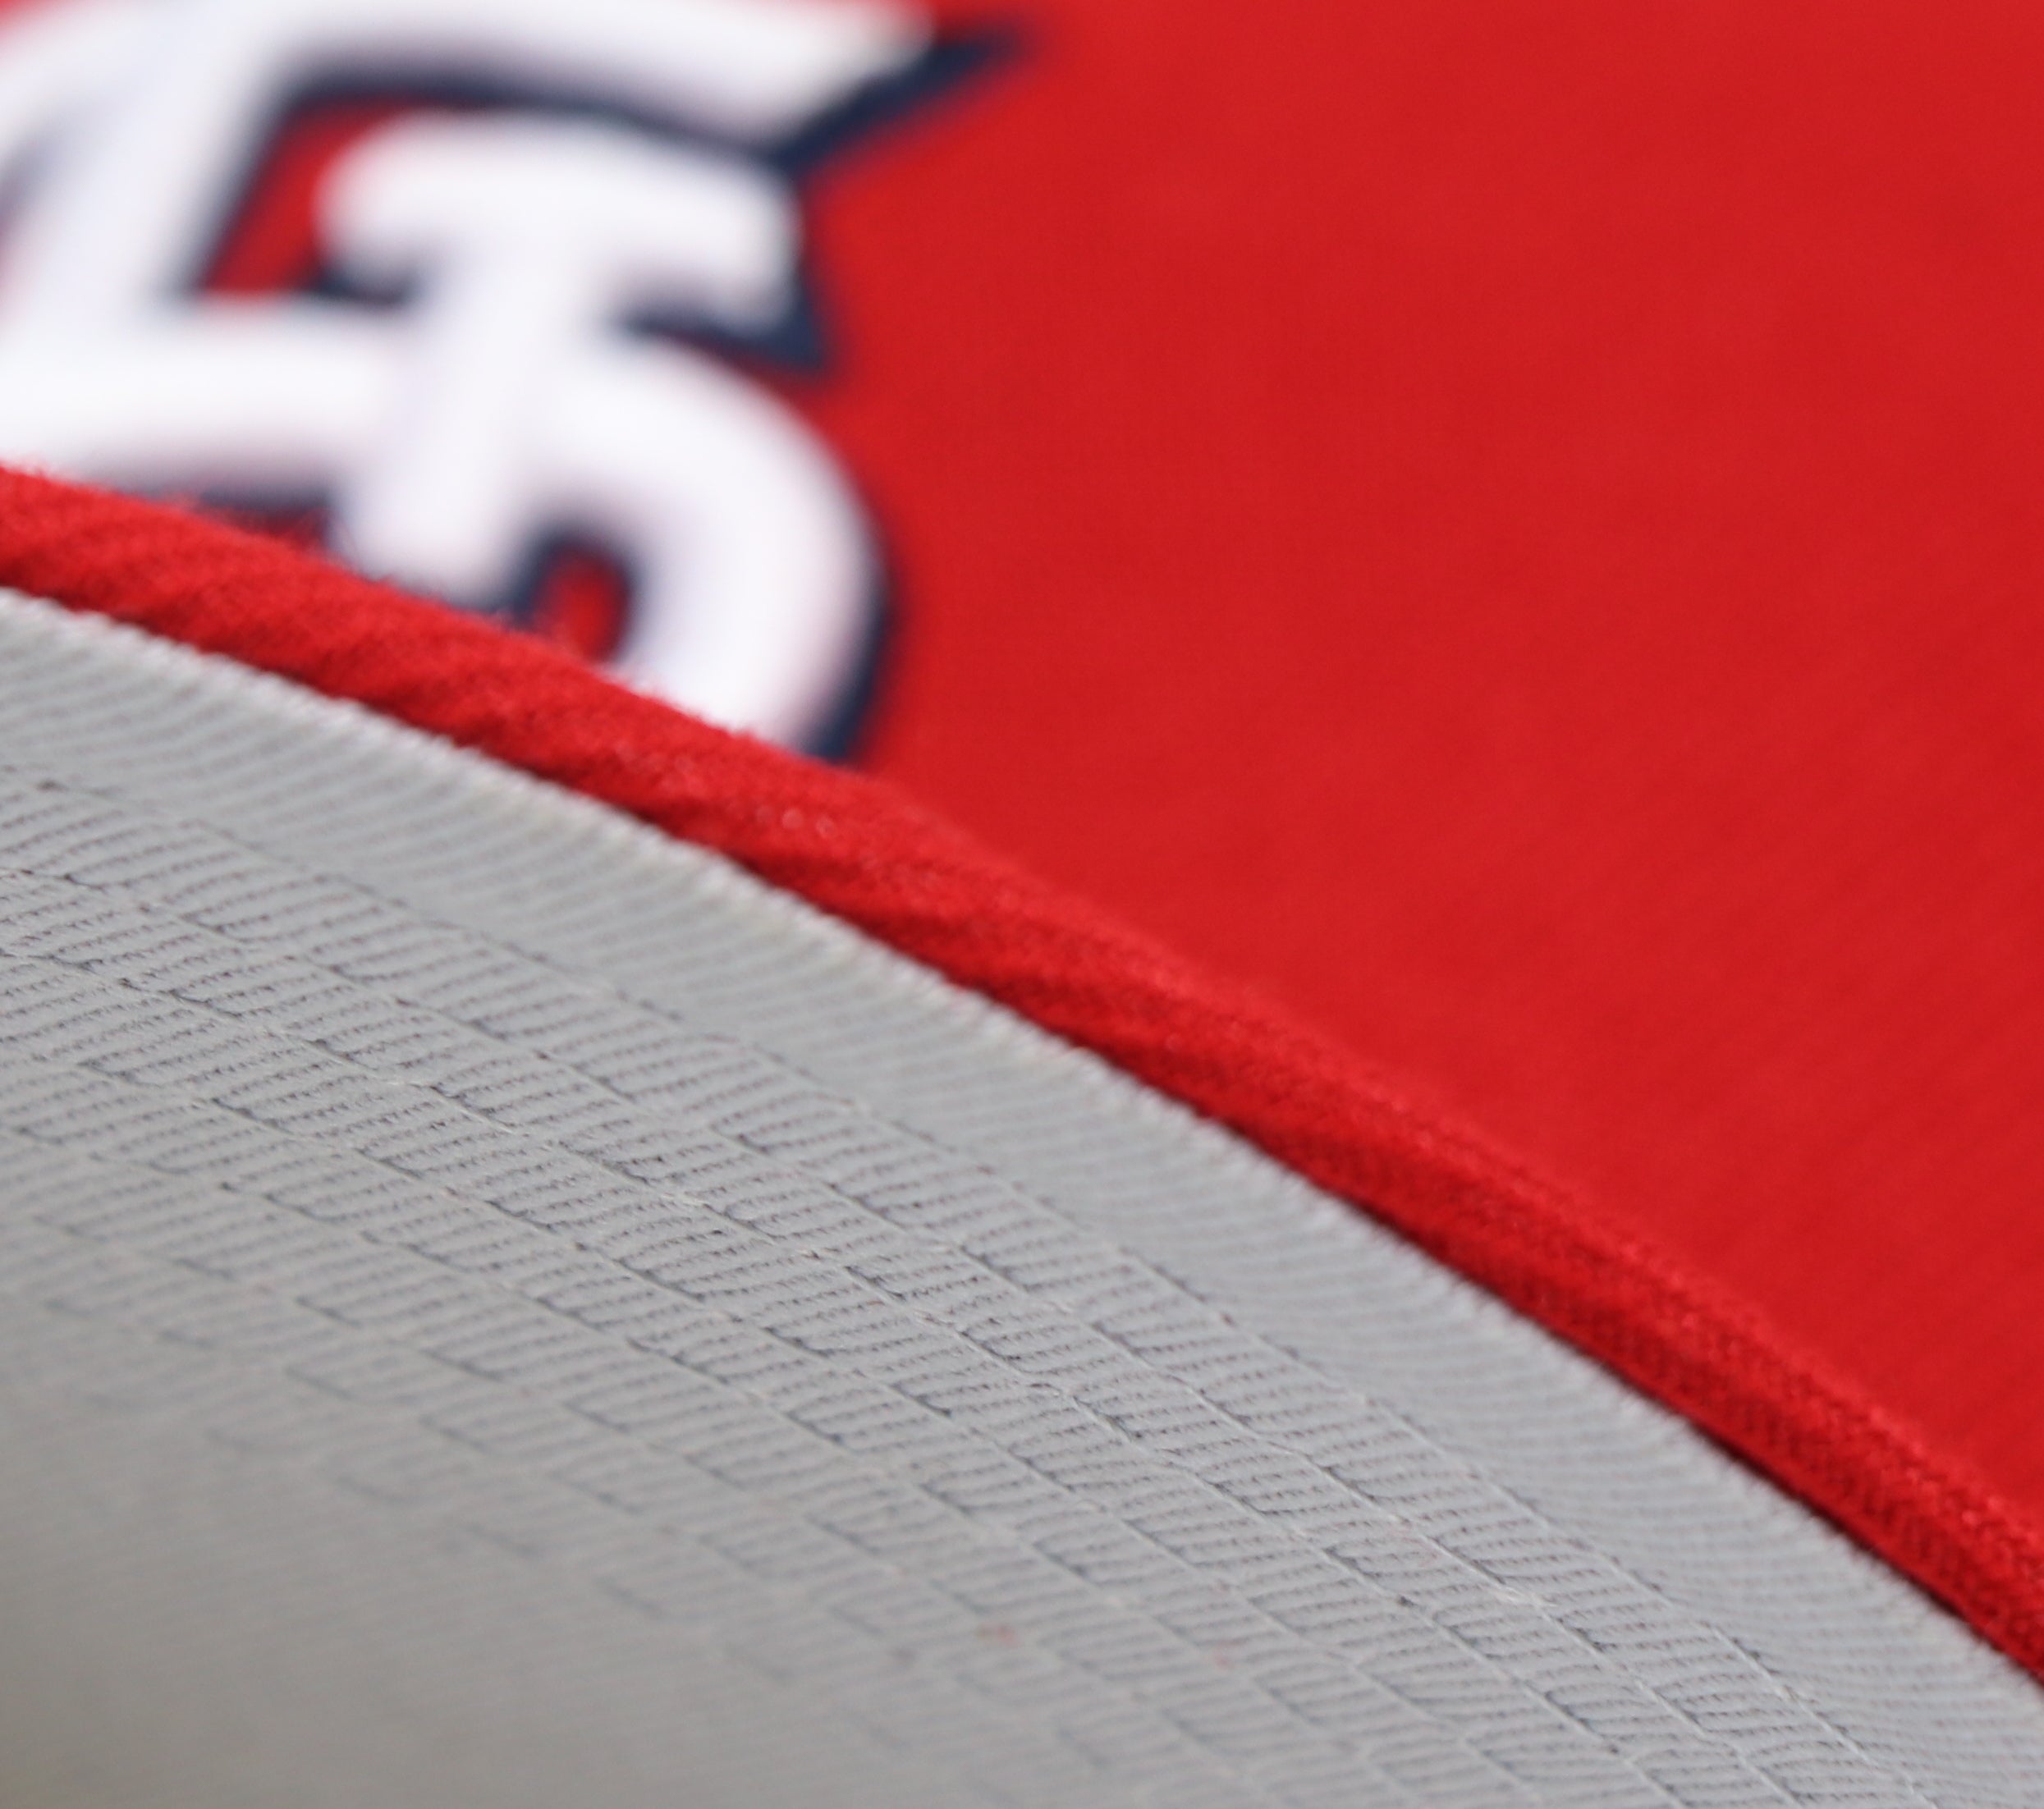 ST. LOUIS CARDINALS (ALL RED) "2006 WORLD SERIES" NEW ERA 59FIFTY  FITTED (GREY BOTTOM)